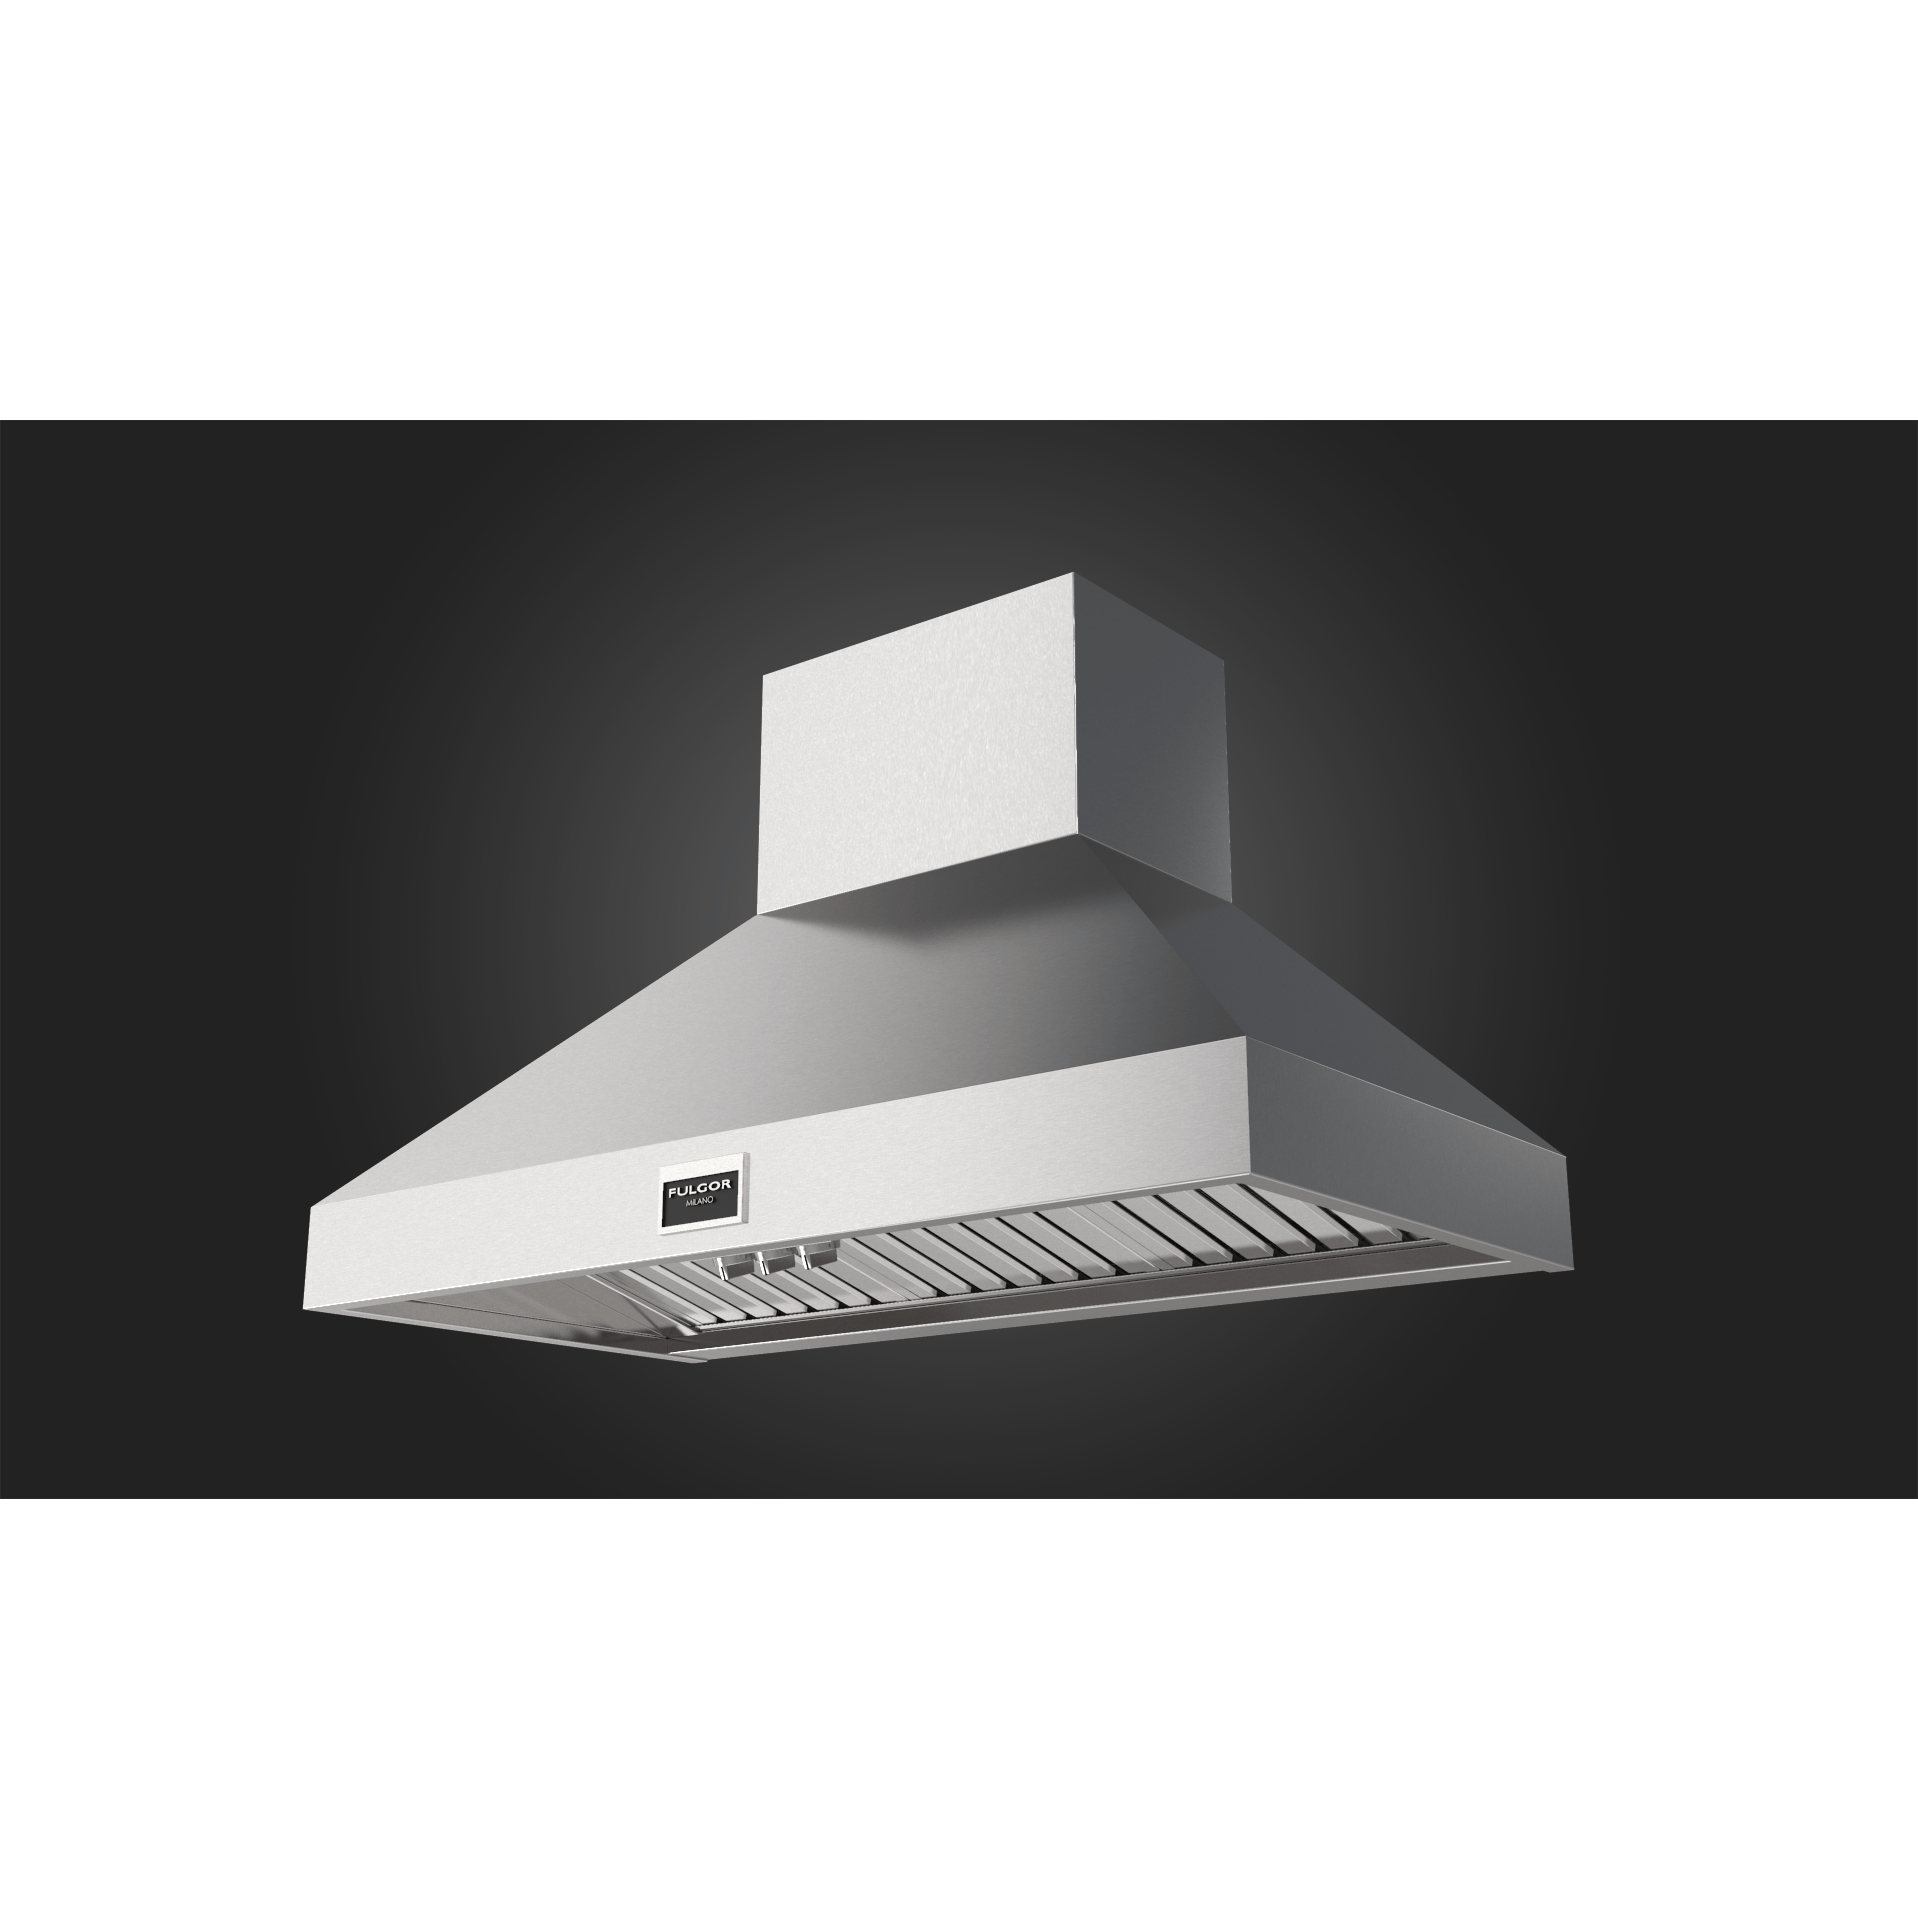 Fulgor Milano 48" Wall Mount Range Hood with 3-Speeds, 1000 CFM Blower Stainless Steel - F6PC48DS1 Range Hoods F6PC48DS1 Luxury Appliances Direct